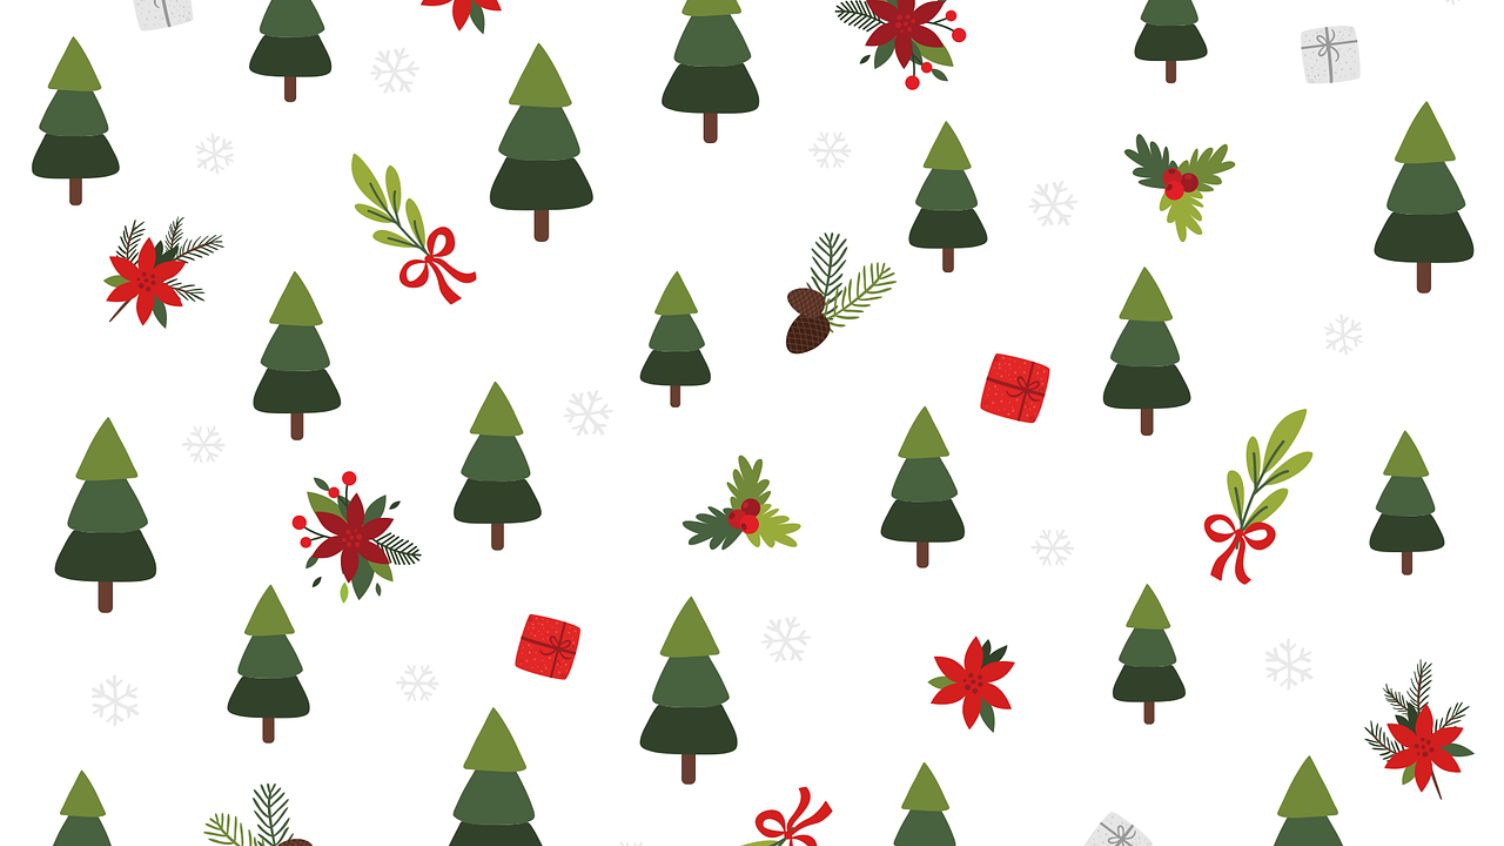 20 Best Christmas Zoom Backgrounds